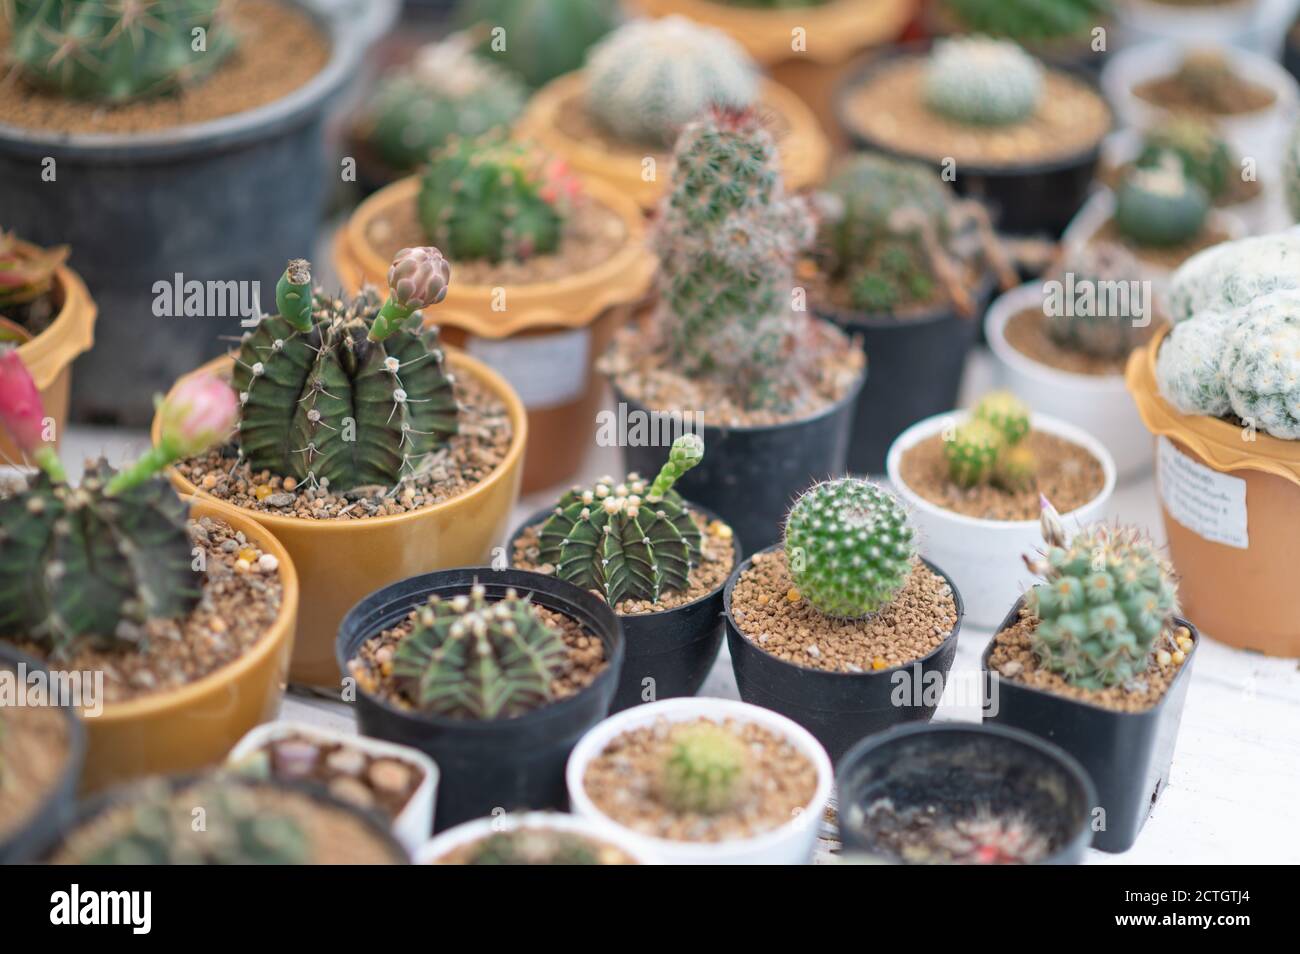 Selective focus desert plants in small plants. Succulents and cactus in different concrete pots. Home decoration. Stock Photo